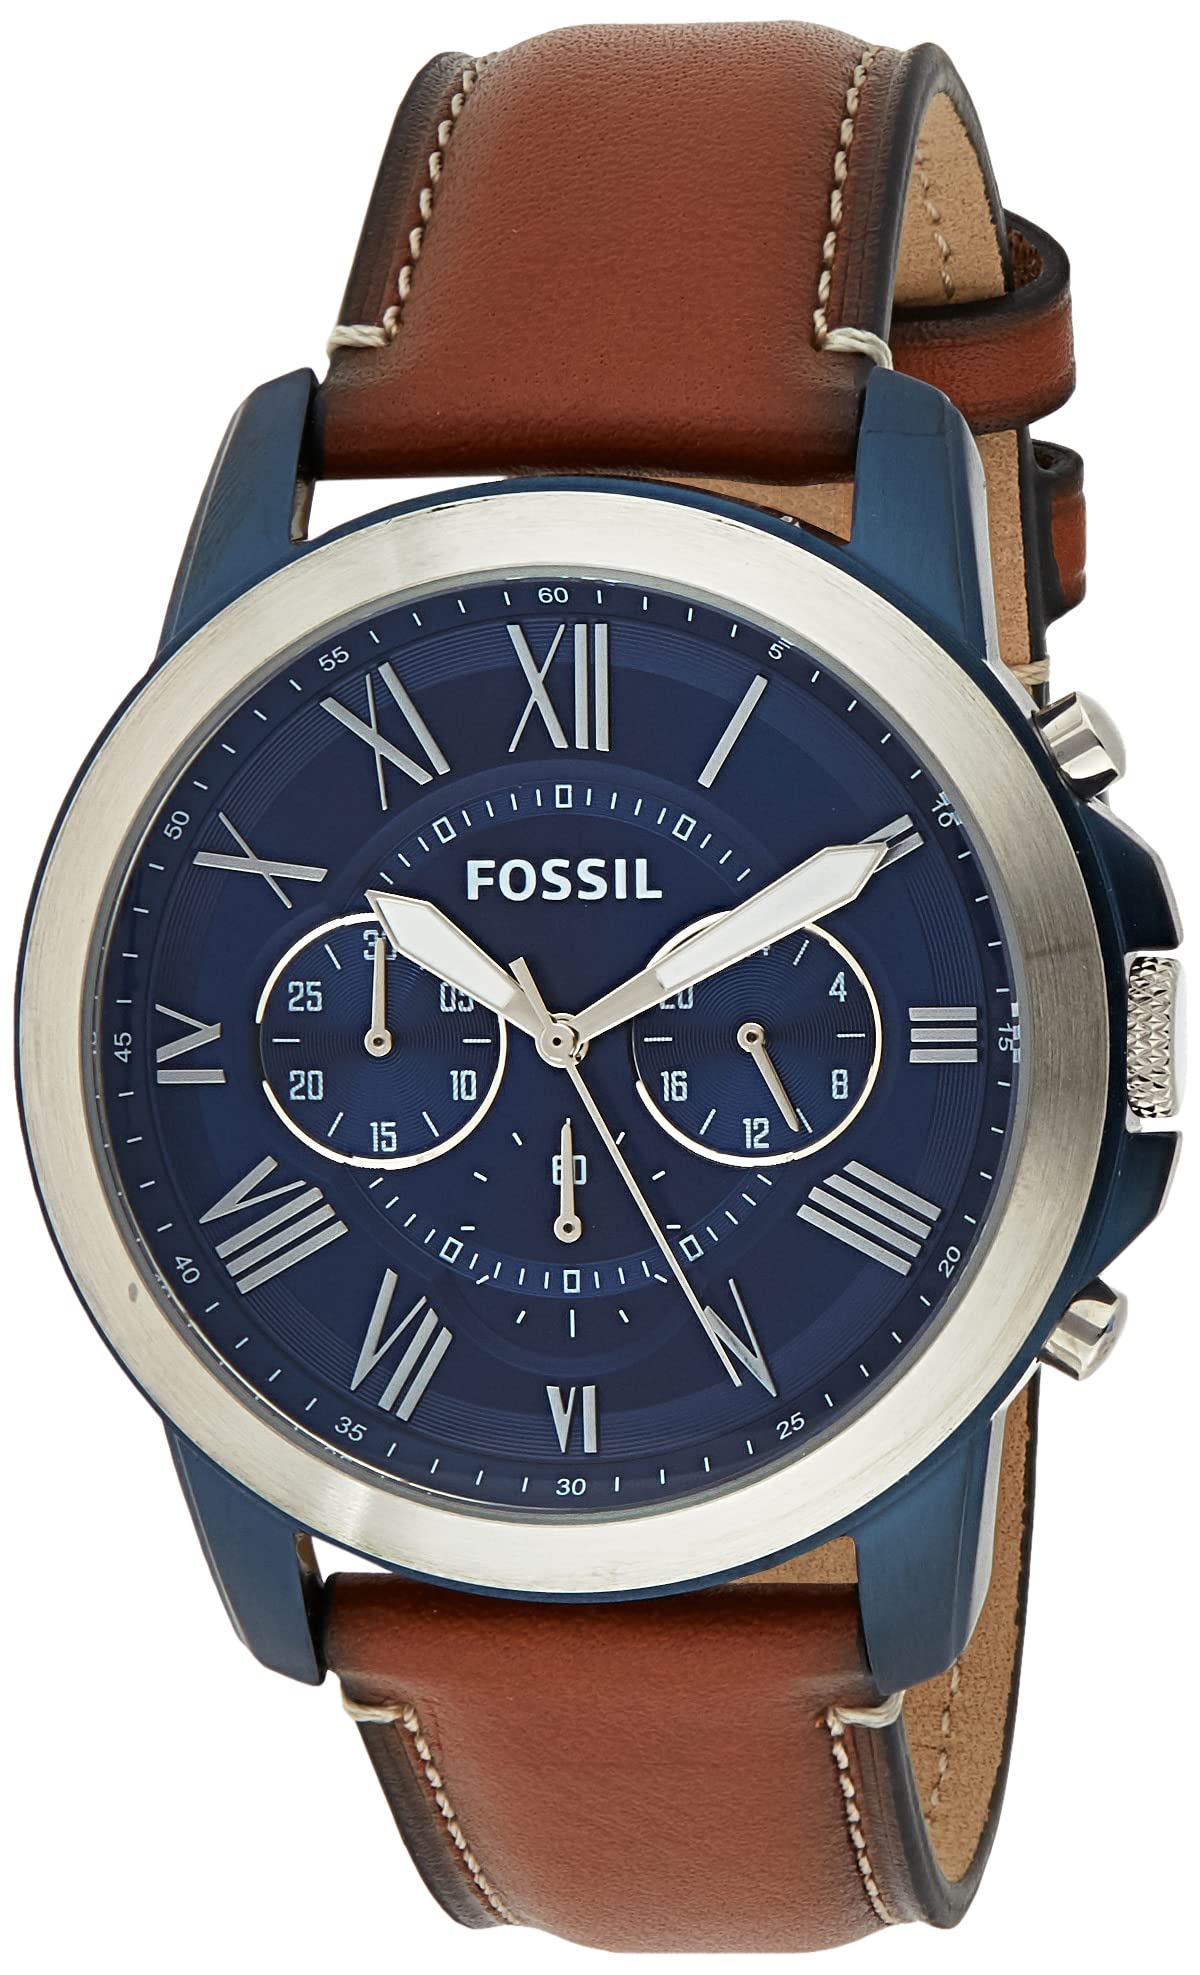 Arriba 67+ imagen fossil watches prices